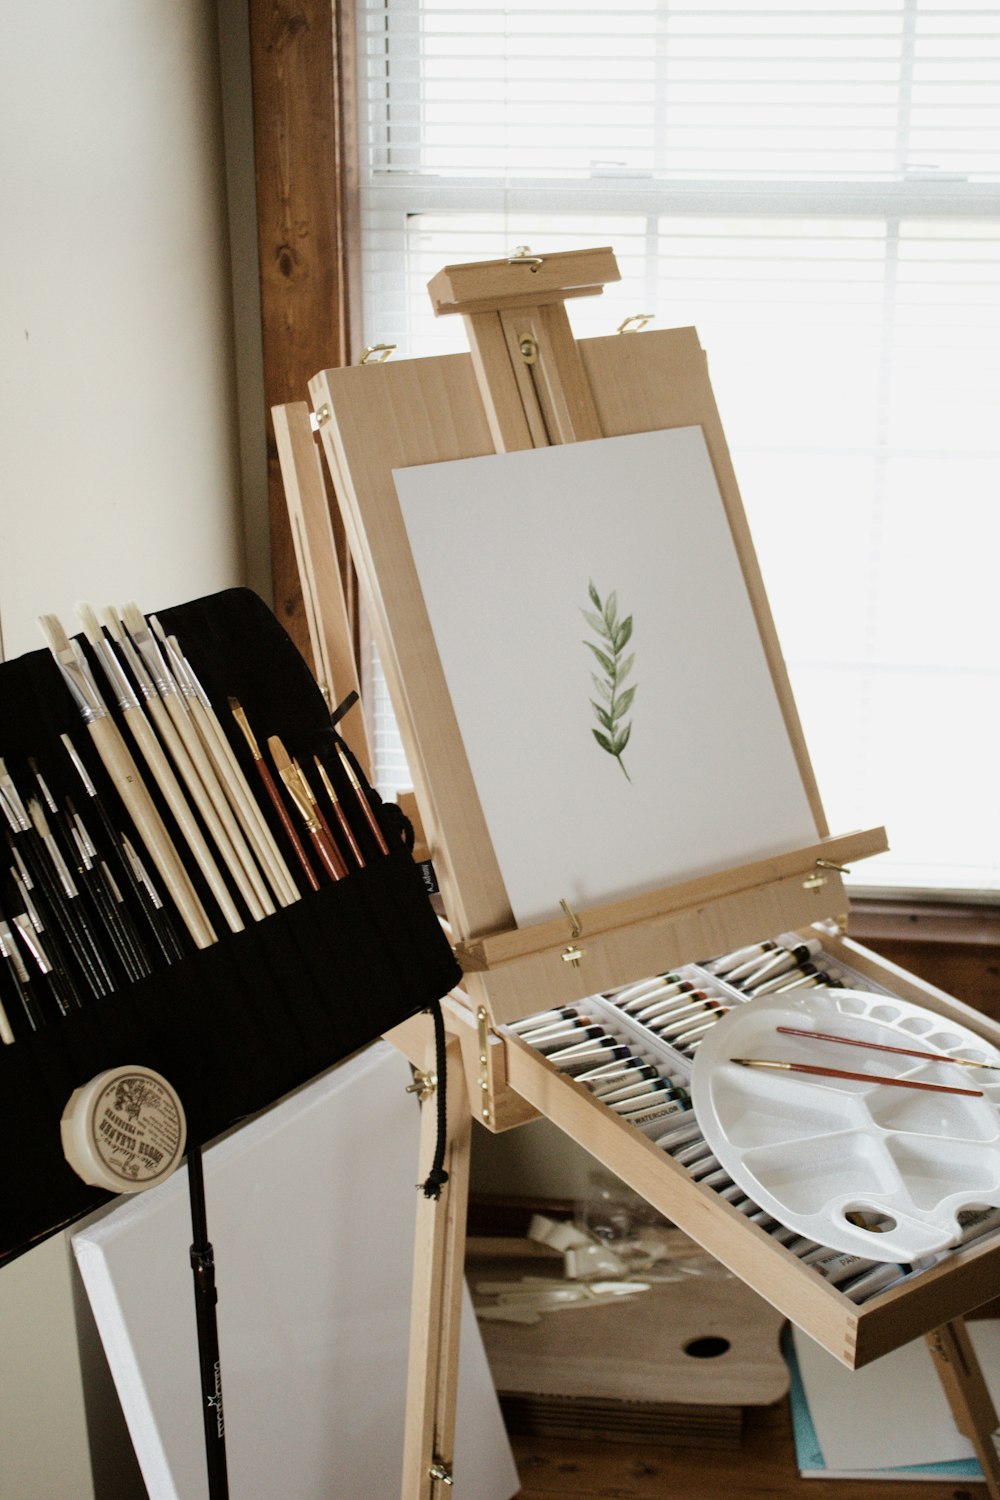 paint brushes beside a French easel and paint canvass